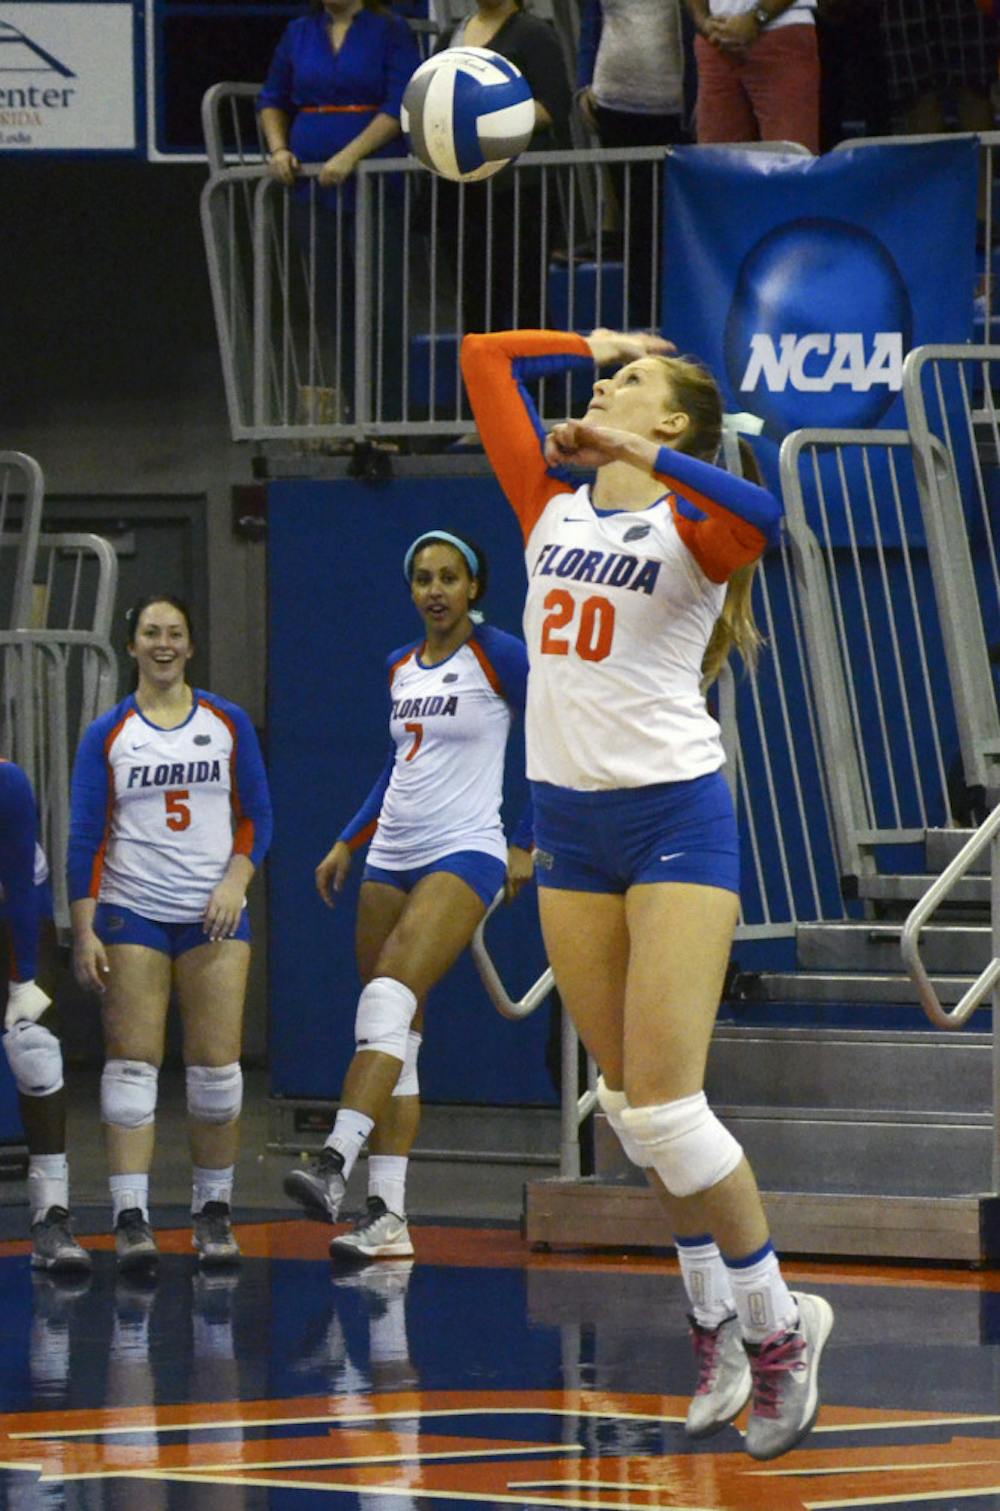 <p>Defensive Specialist Nikki O'Rourke serves during Florida's 3-1 win against Miami in the second round of the NCAA Tournament on Dec. 6 in the O'Connell Center.</p>